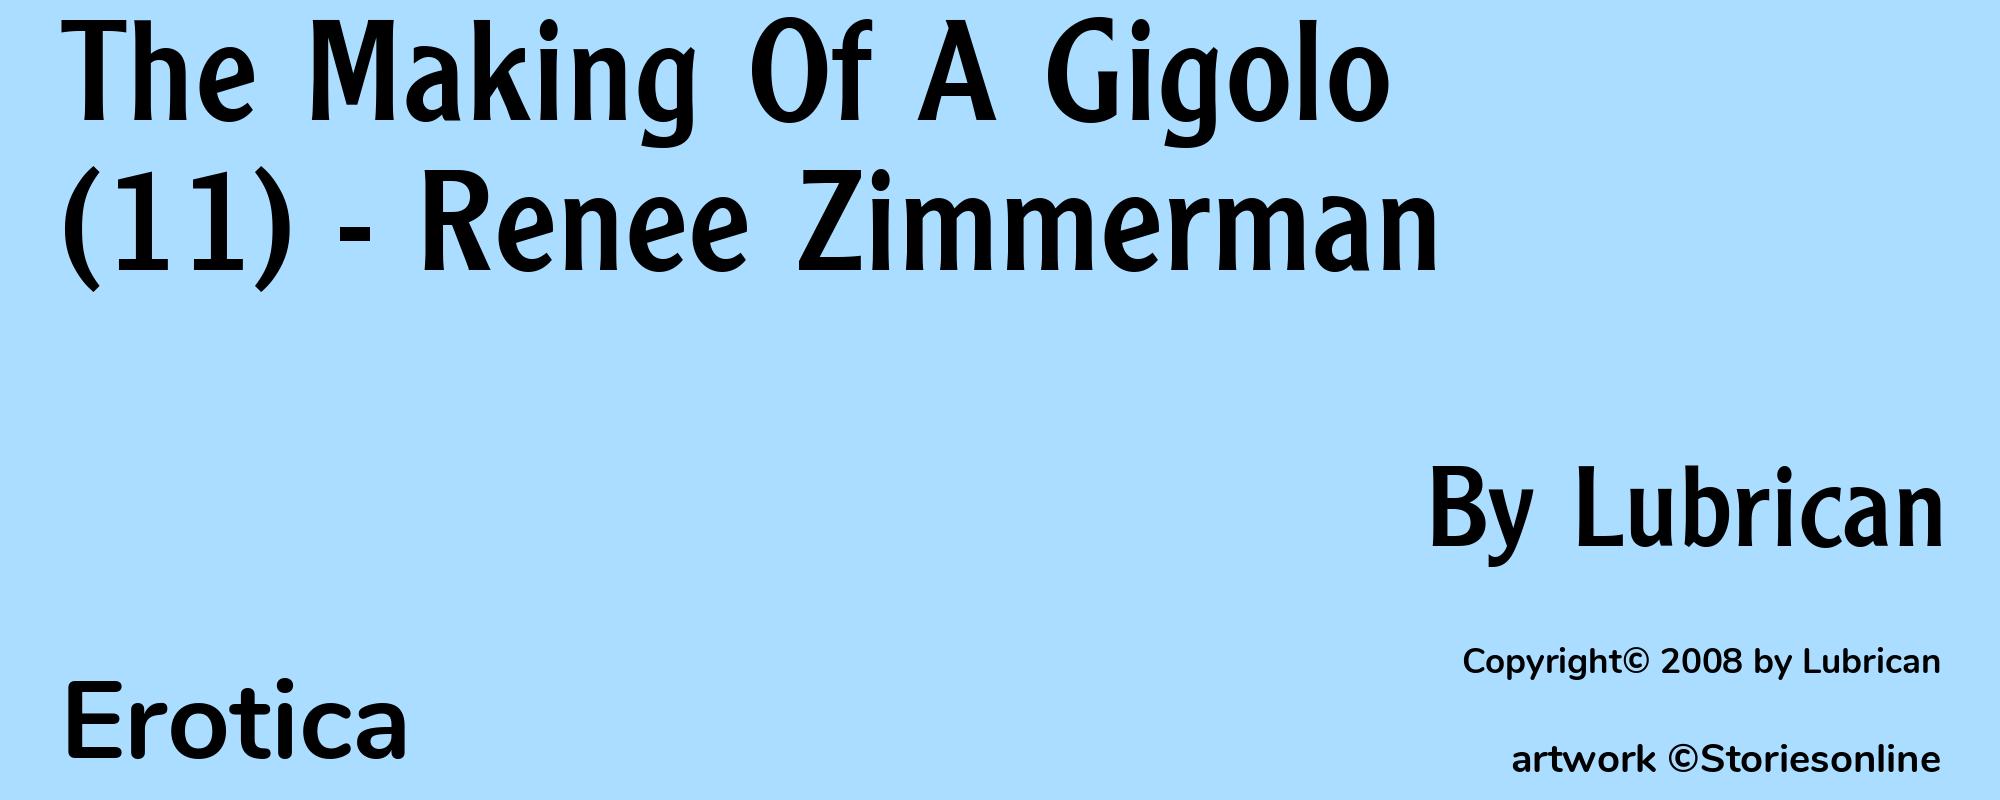 The Making Of A Gigolo (11) - Renee Zimmerman - Cover